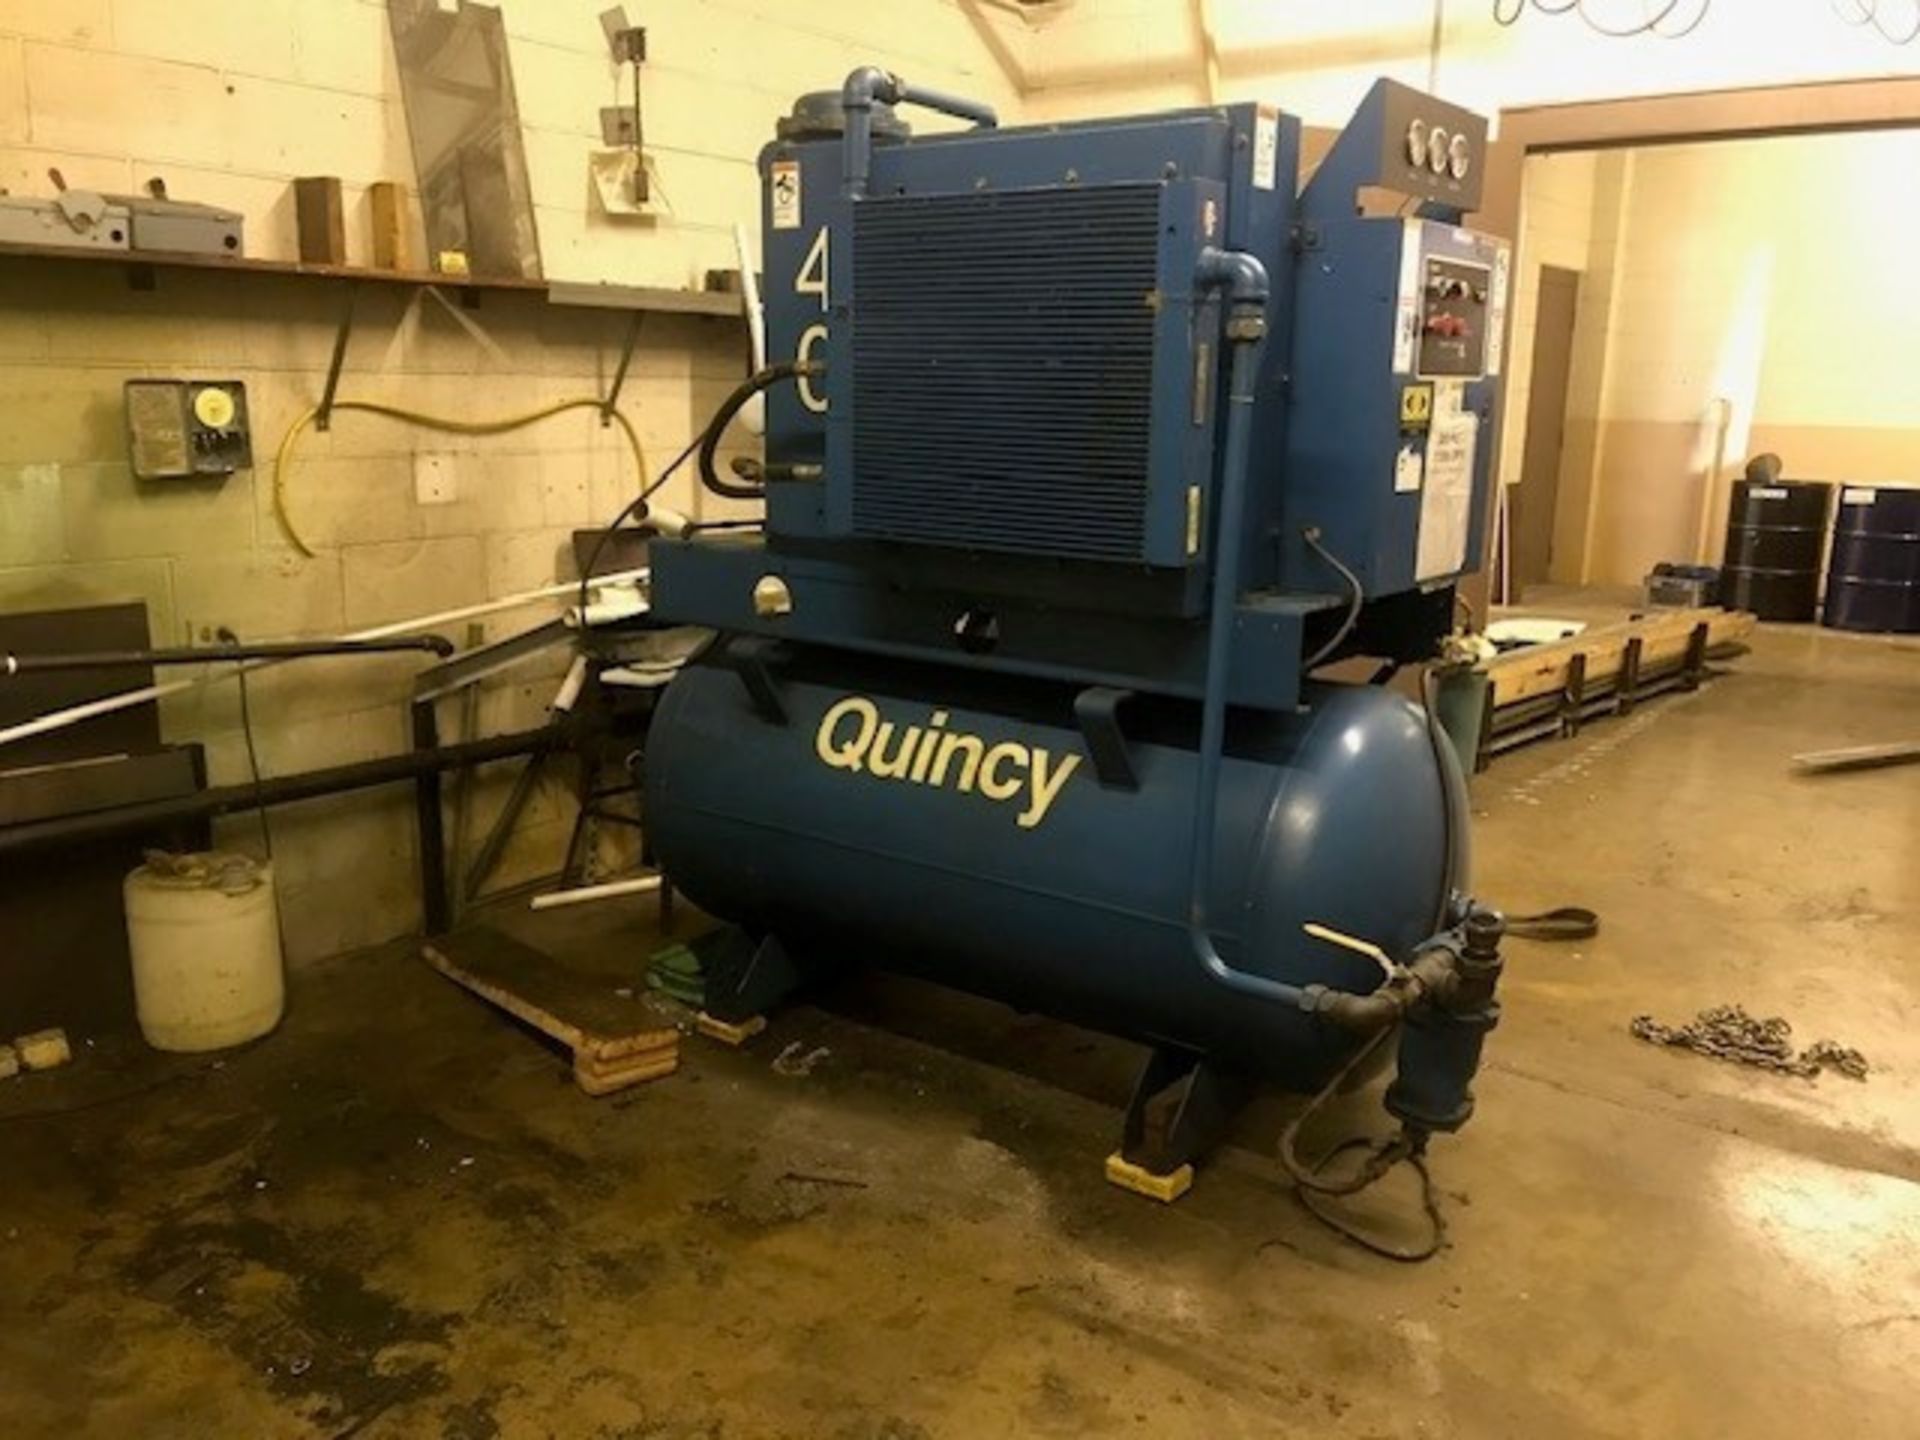 Quincy Screw Air Compressor, Water Cooled, Hrs. 82045.2 (Load Fee $300) (Located Union Grove, WI) - Image 2 of 5